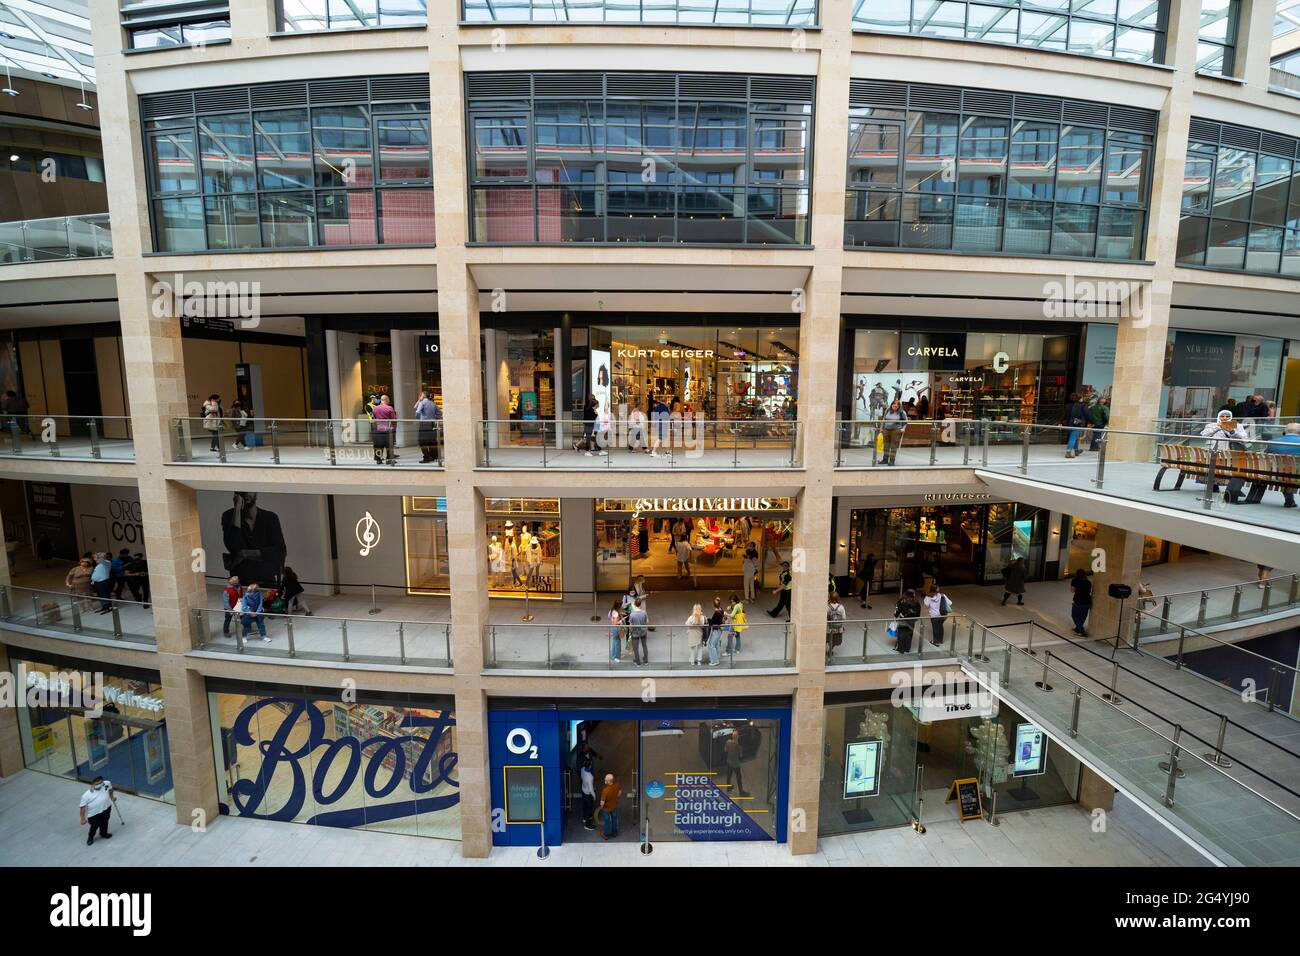 Edinburgh, Scotland, UK. 24 June 2021. First images of the new St James Quarter which opened this morning in Edinburgh. The large retail and residential complex replaced the St James Centre which occupied the site for many years. Pic; Shops are spread over several levels inside full height atrium.  Iain Masterton/Alamy Live News Stock Photo